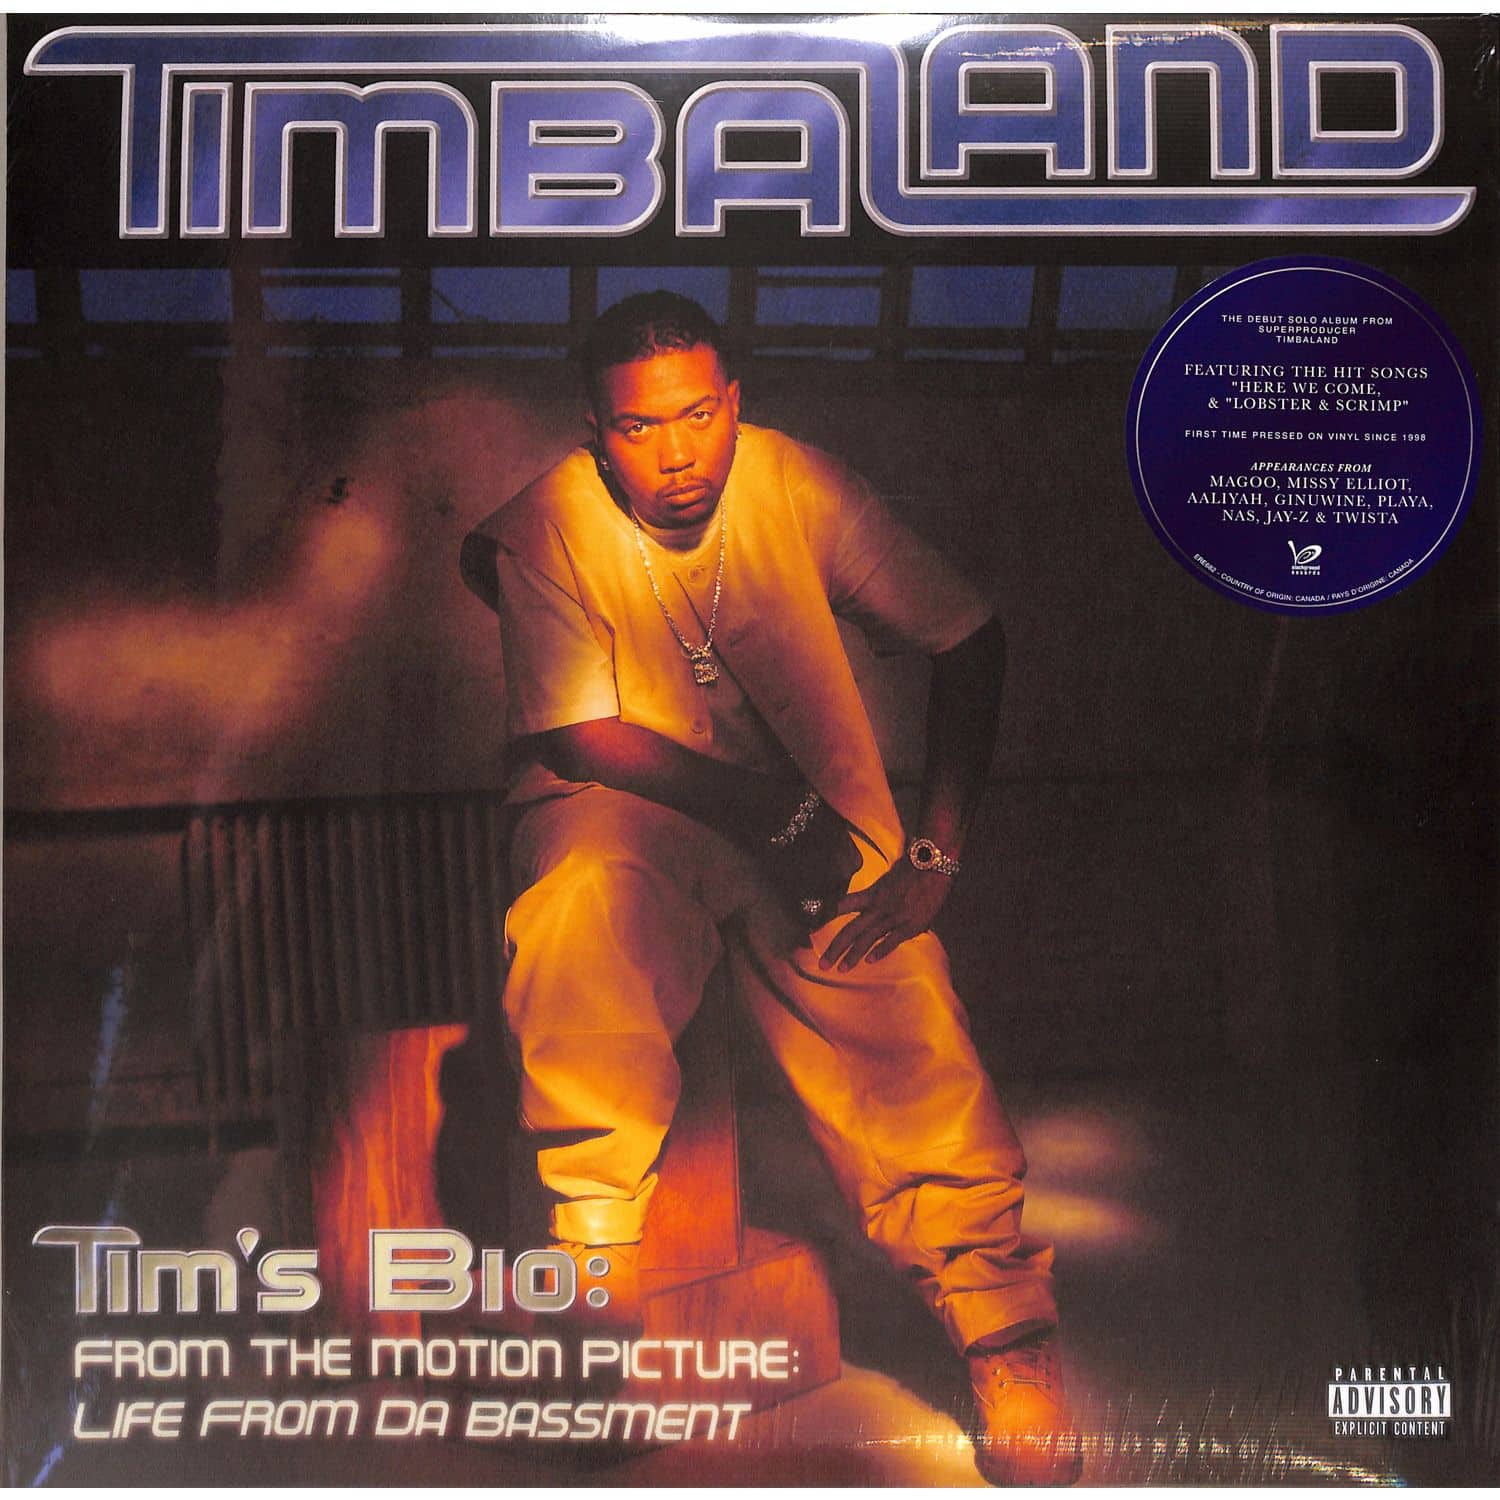 Timbaland - TIMS BIO FROM THE MOTION PICTURE LIFE FROM DA BASSMENT 